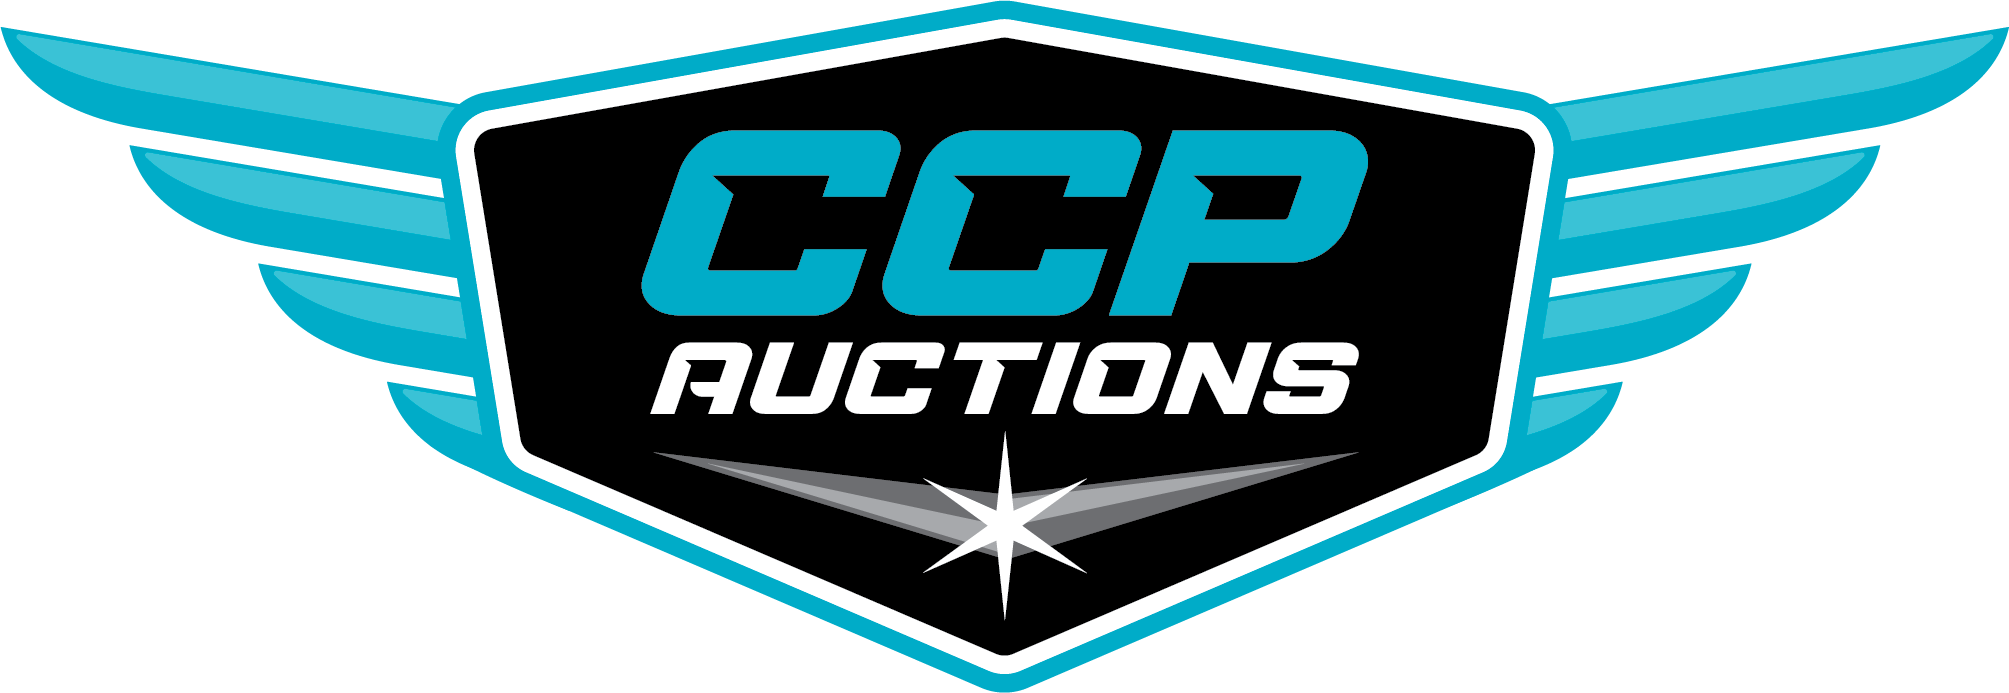 Collector Car Productions